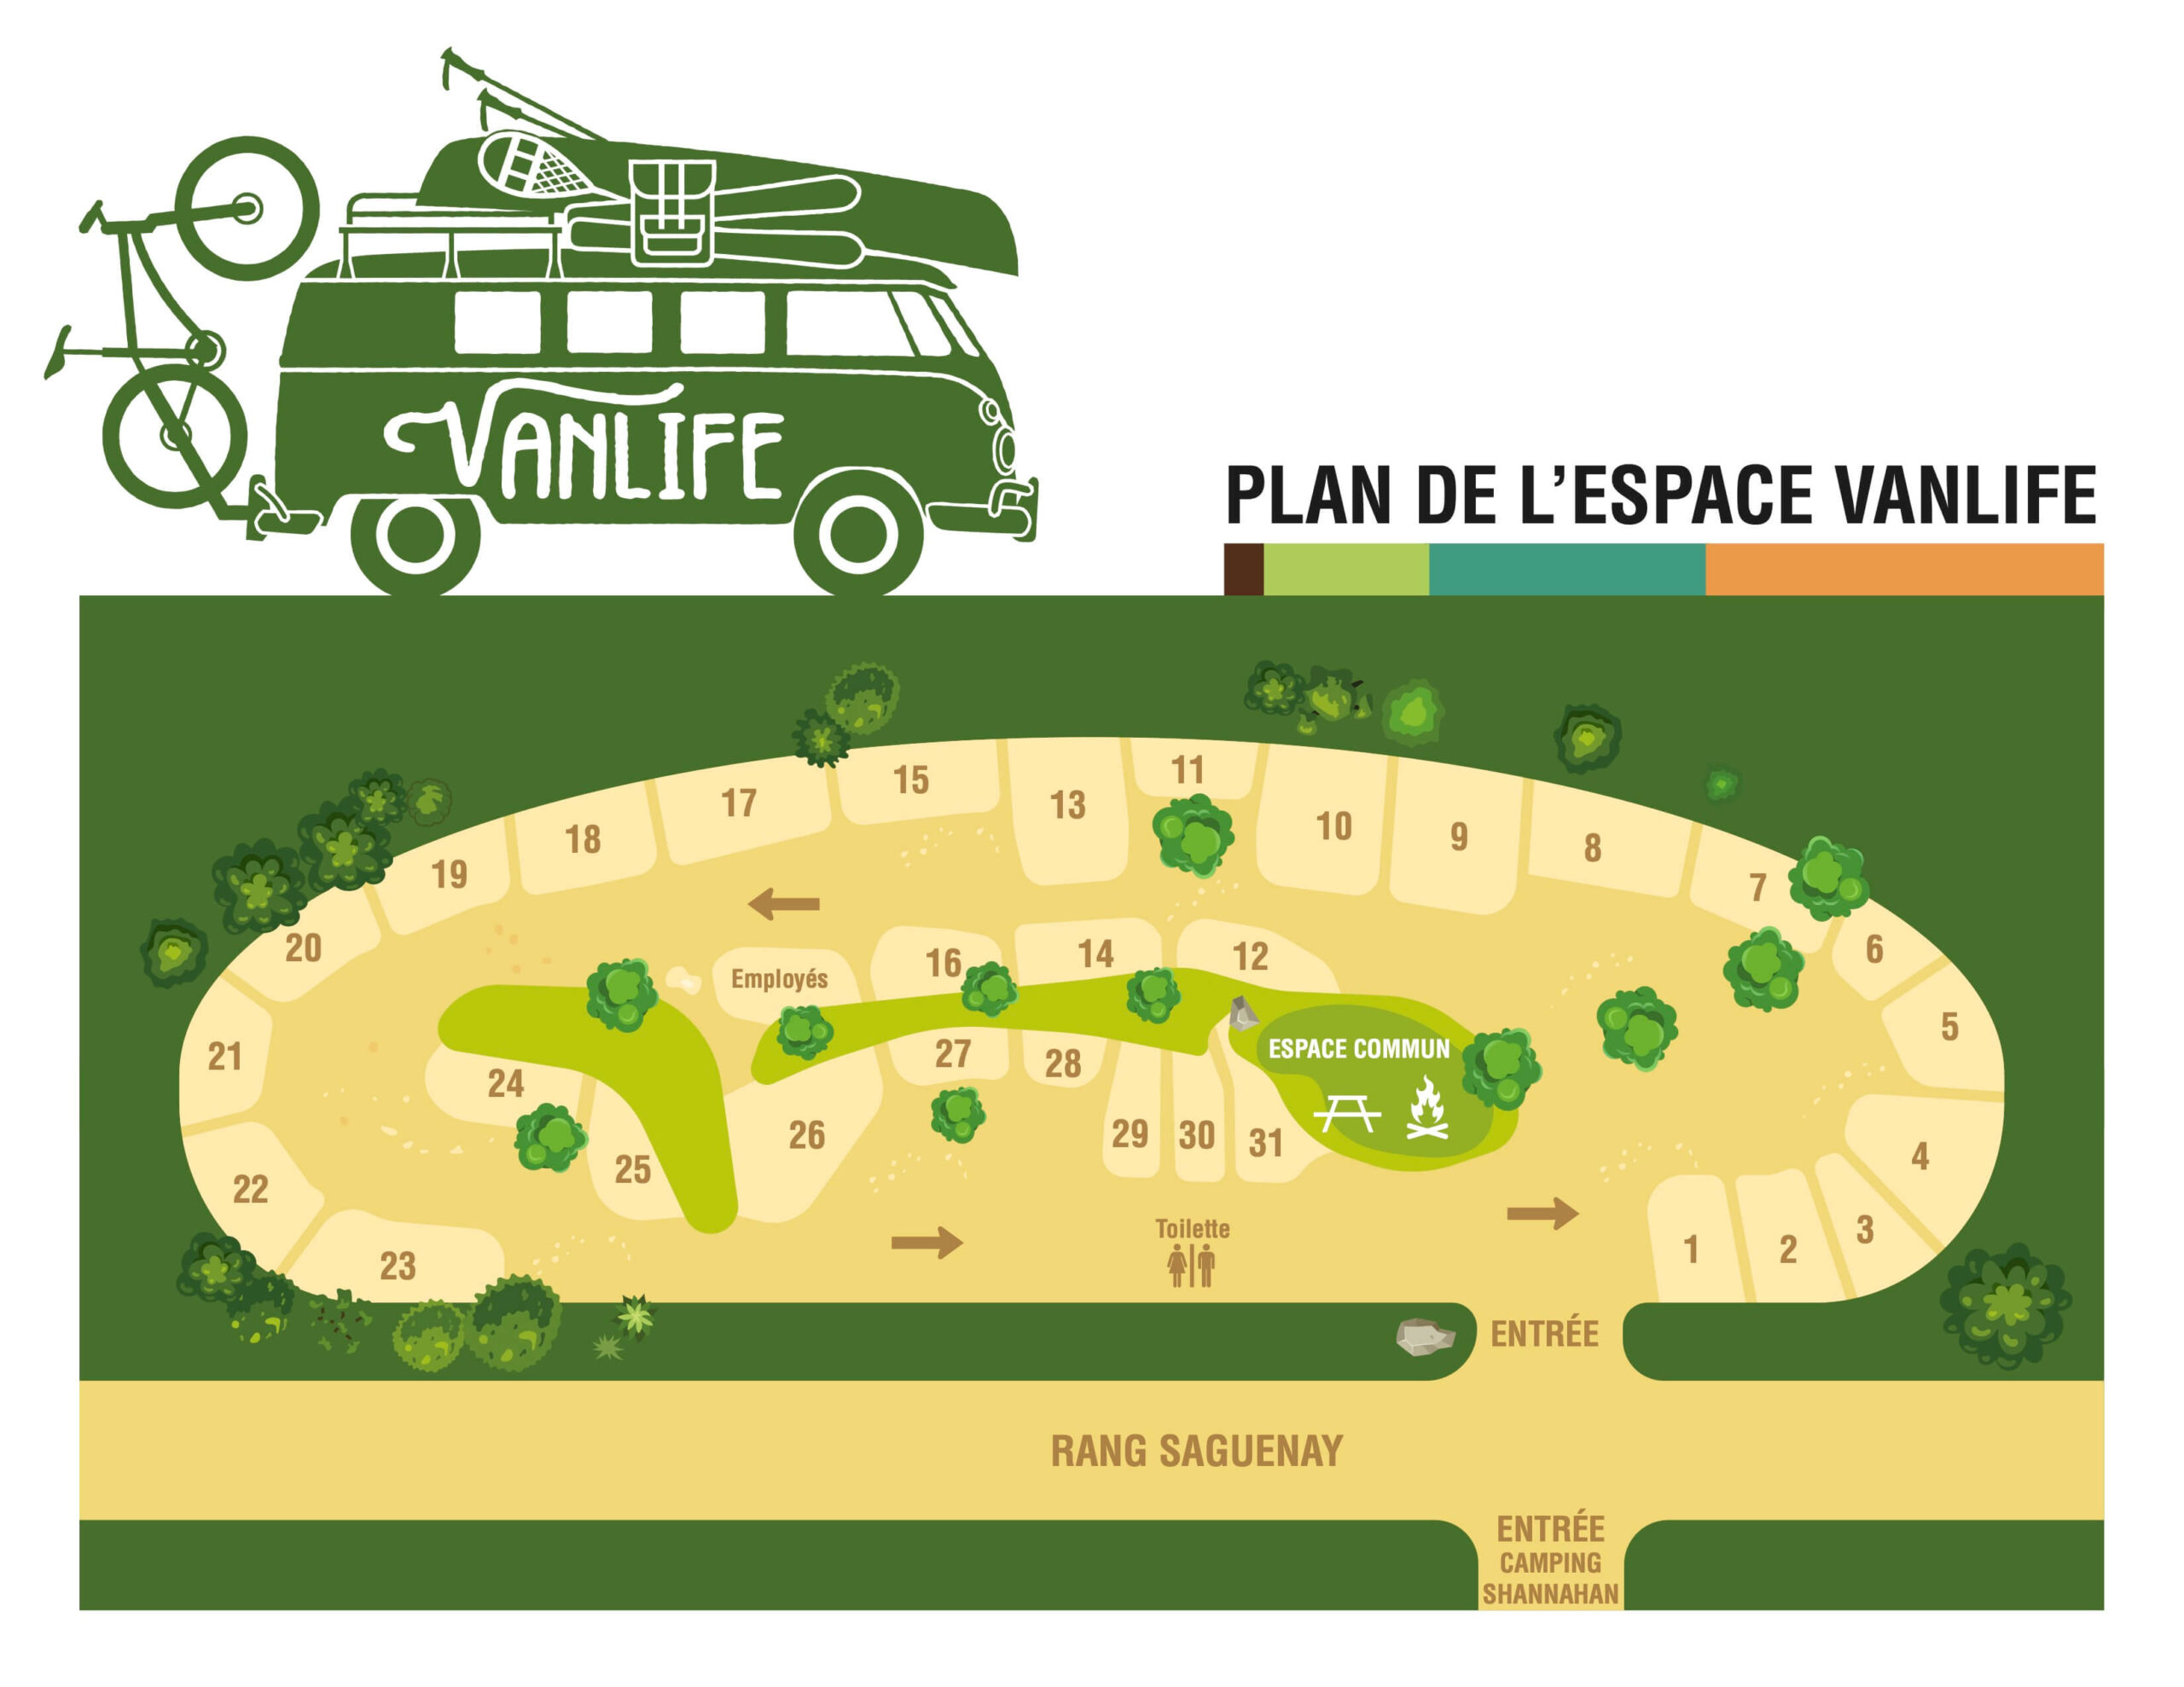 Map of VanLife space, with parking lot numbers.